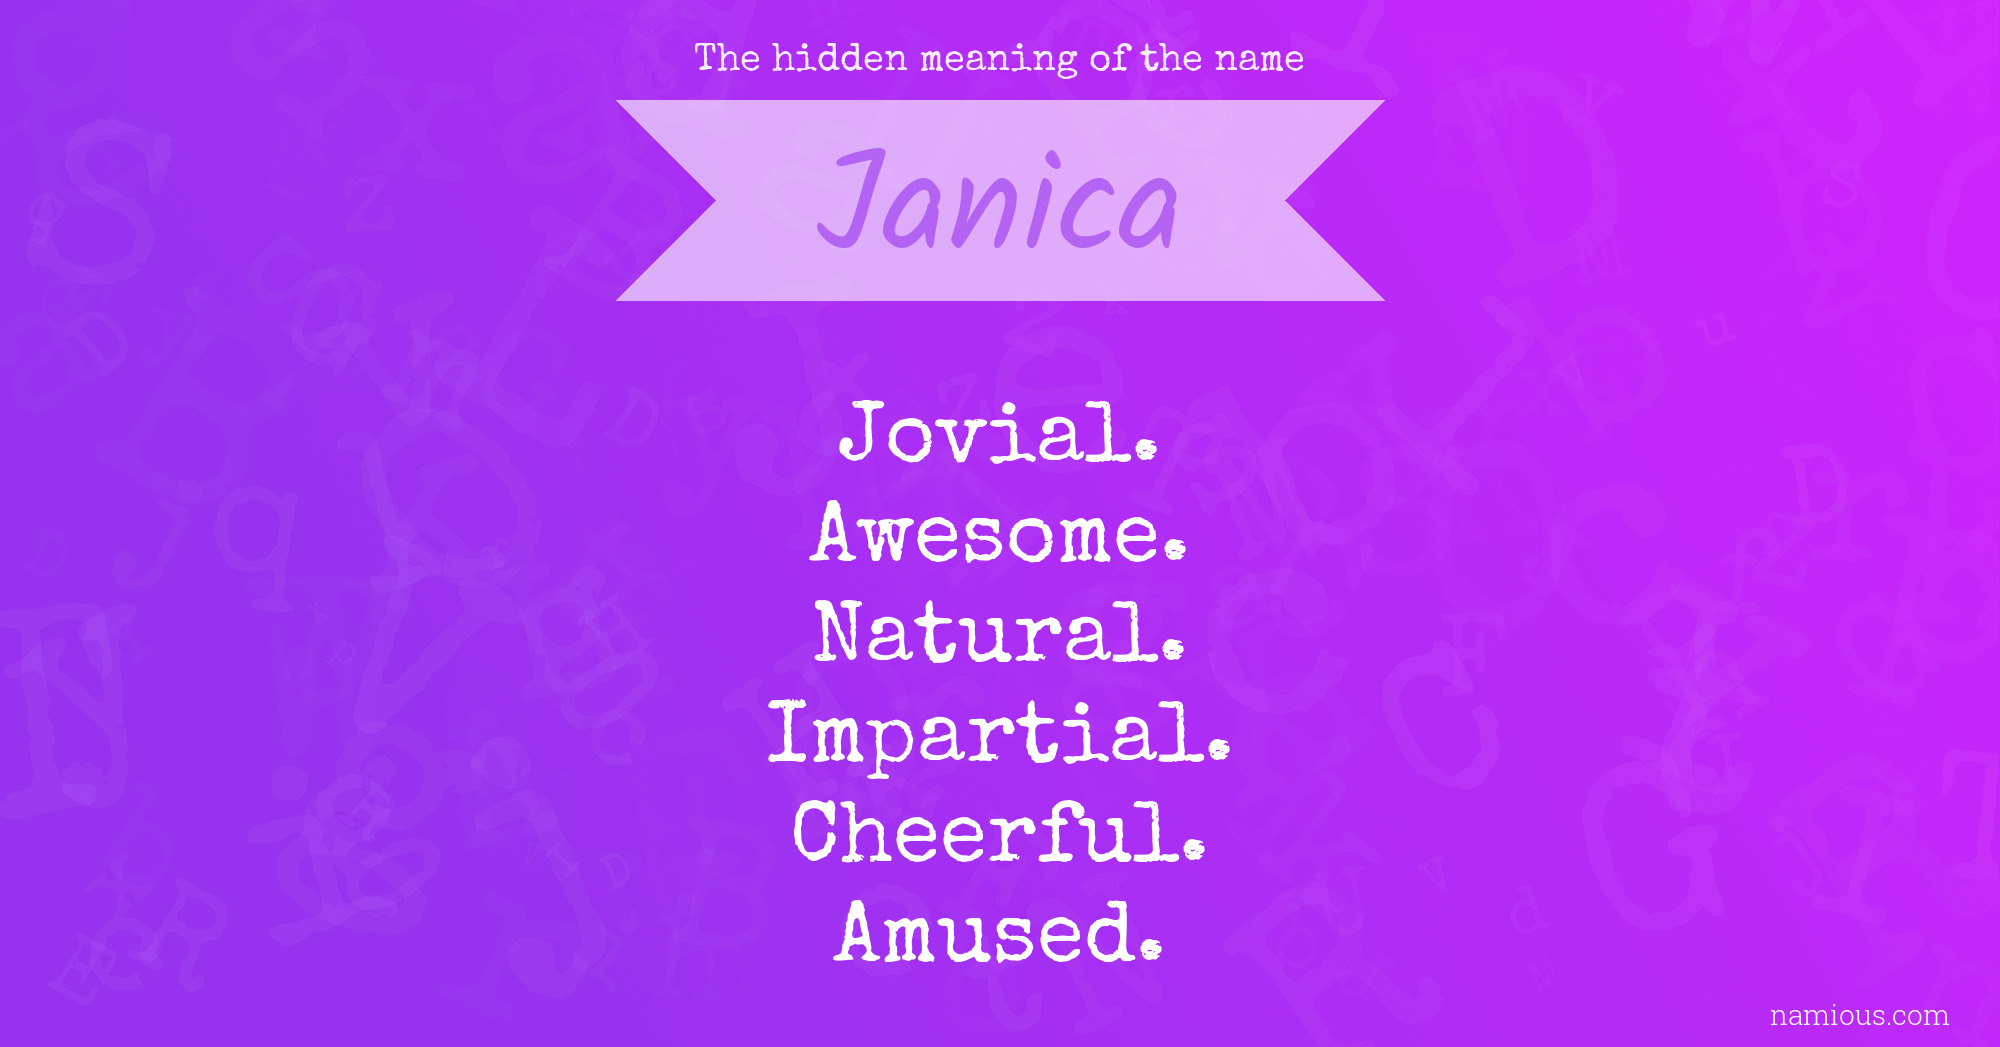 The hidden meaning of the name Janica